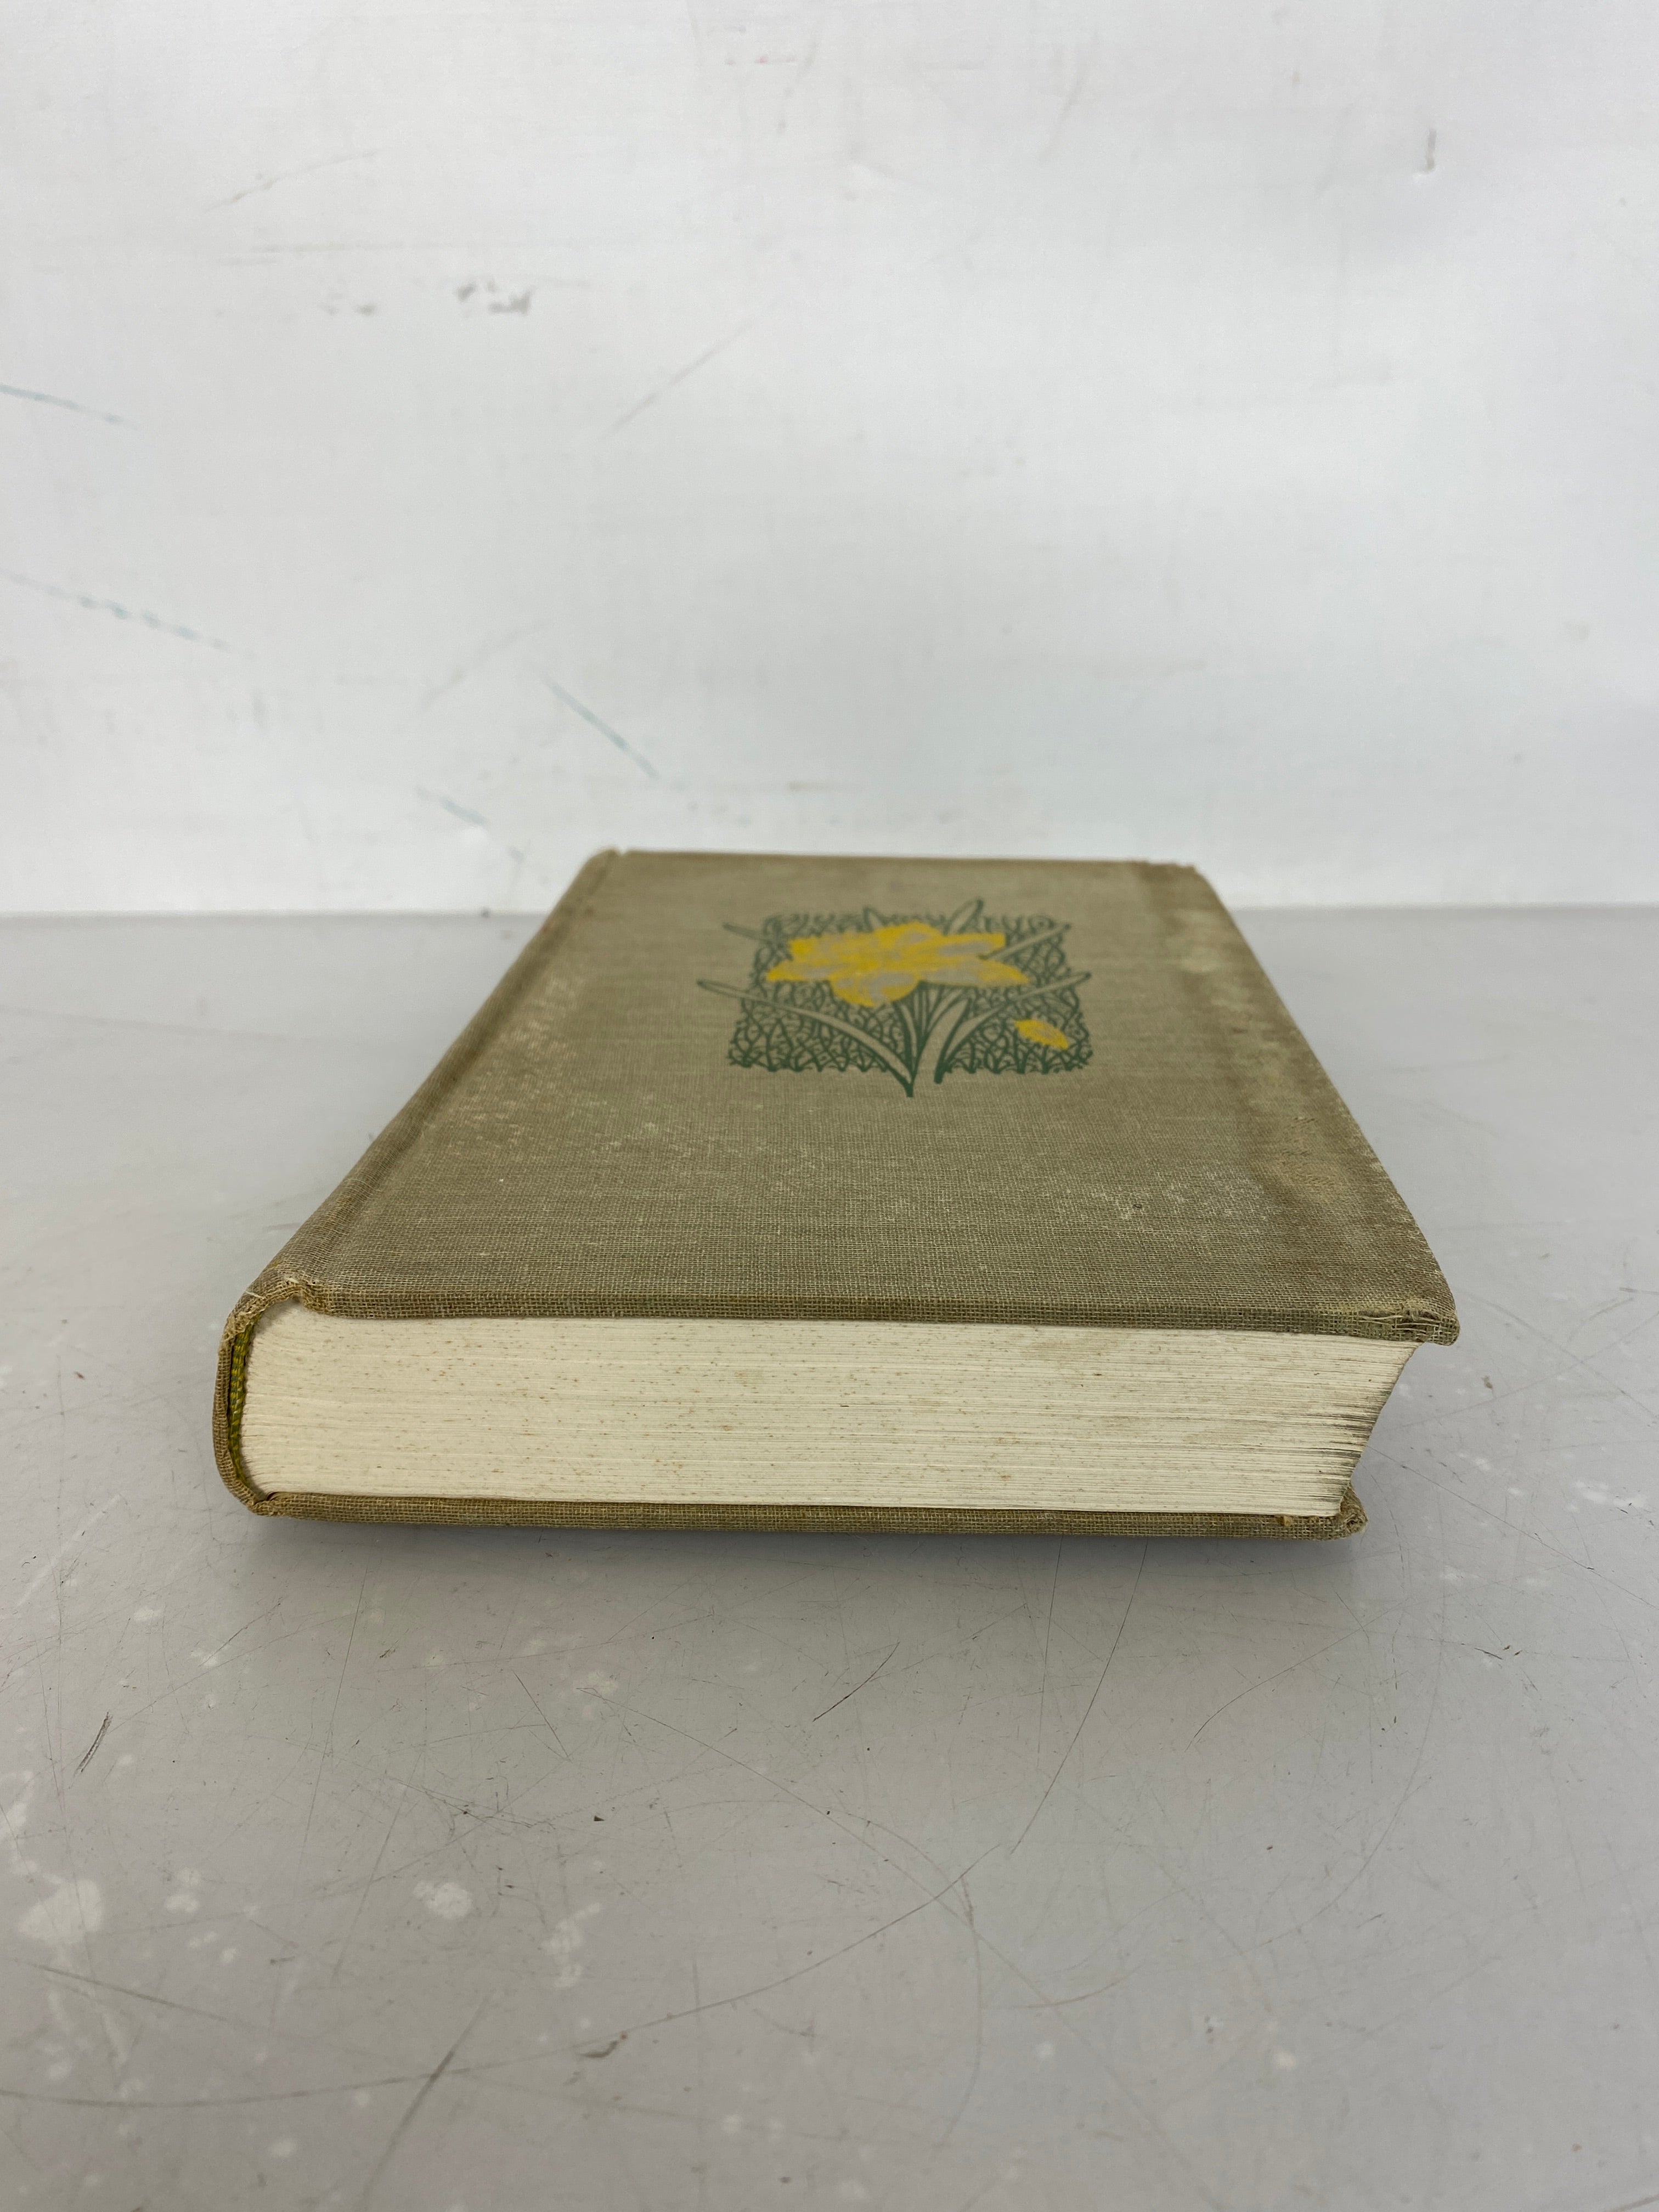 Vintage Favorite Flowers in Color by Seymour, Downer, Frese, Esson, and Everett 1949 HC